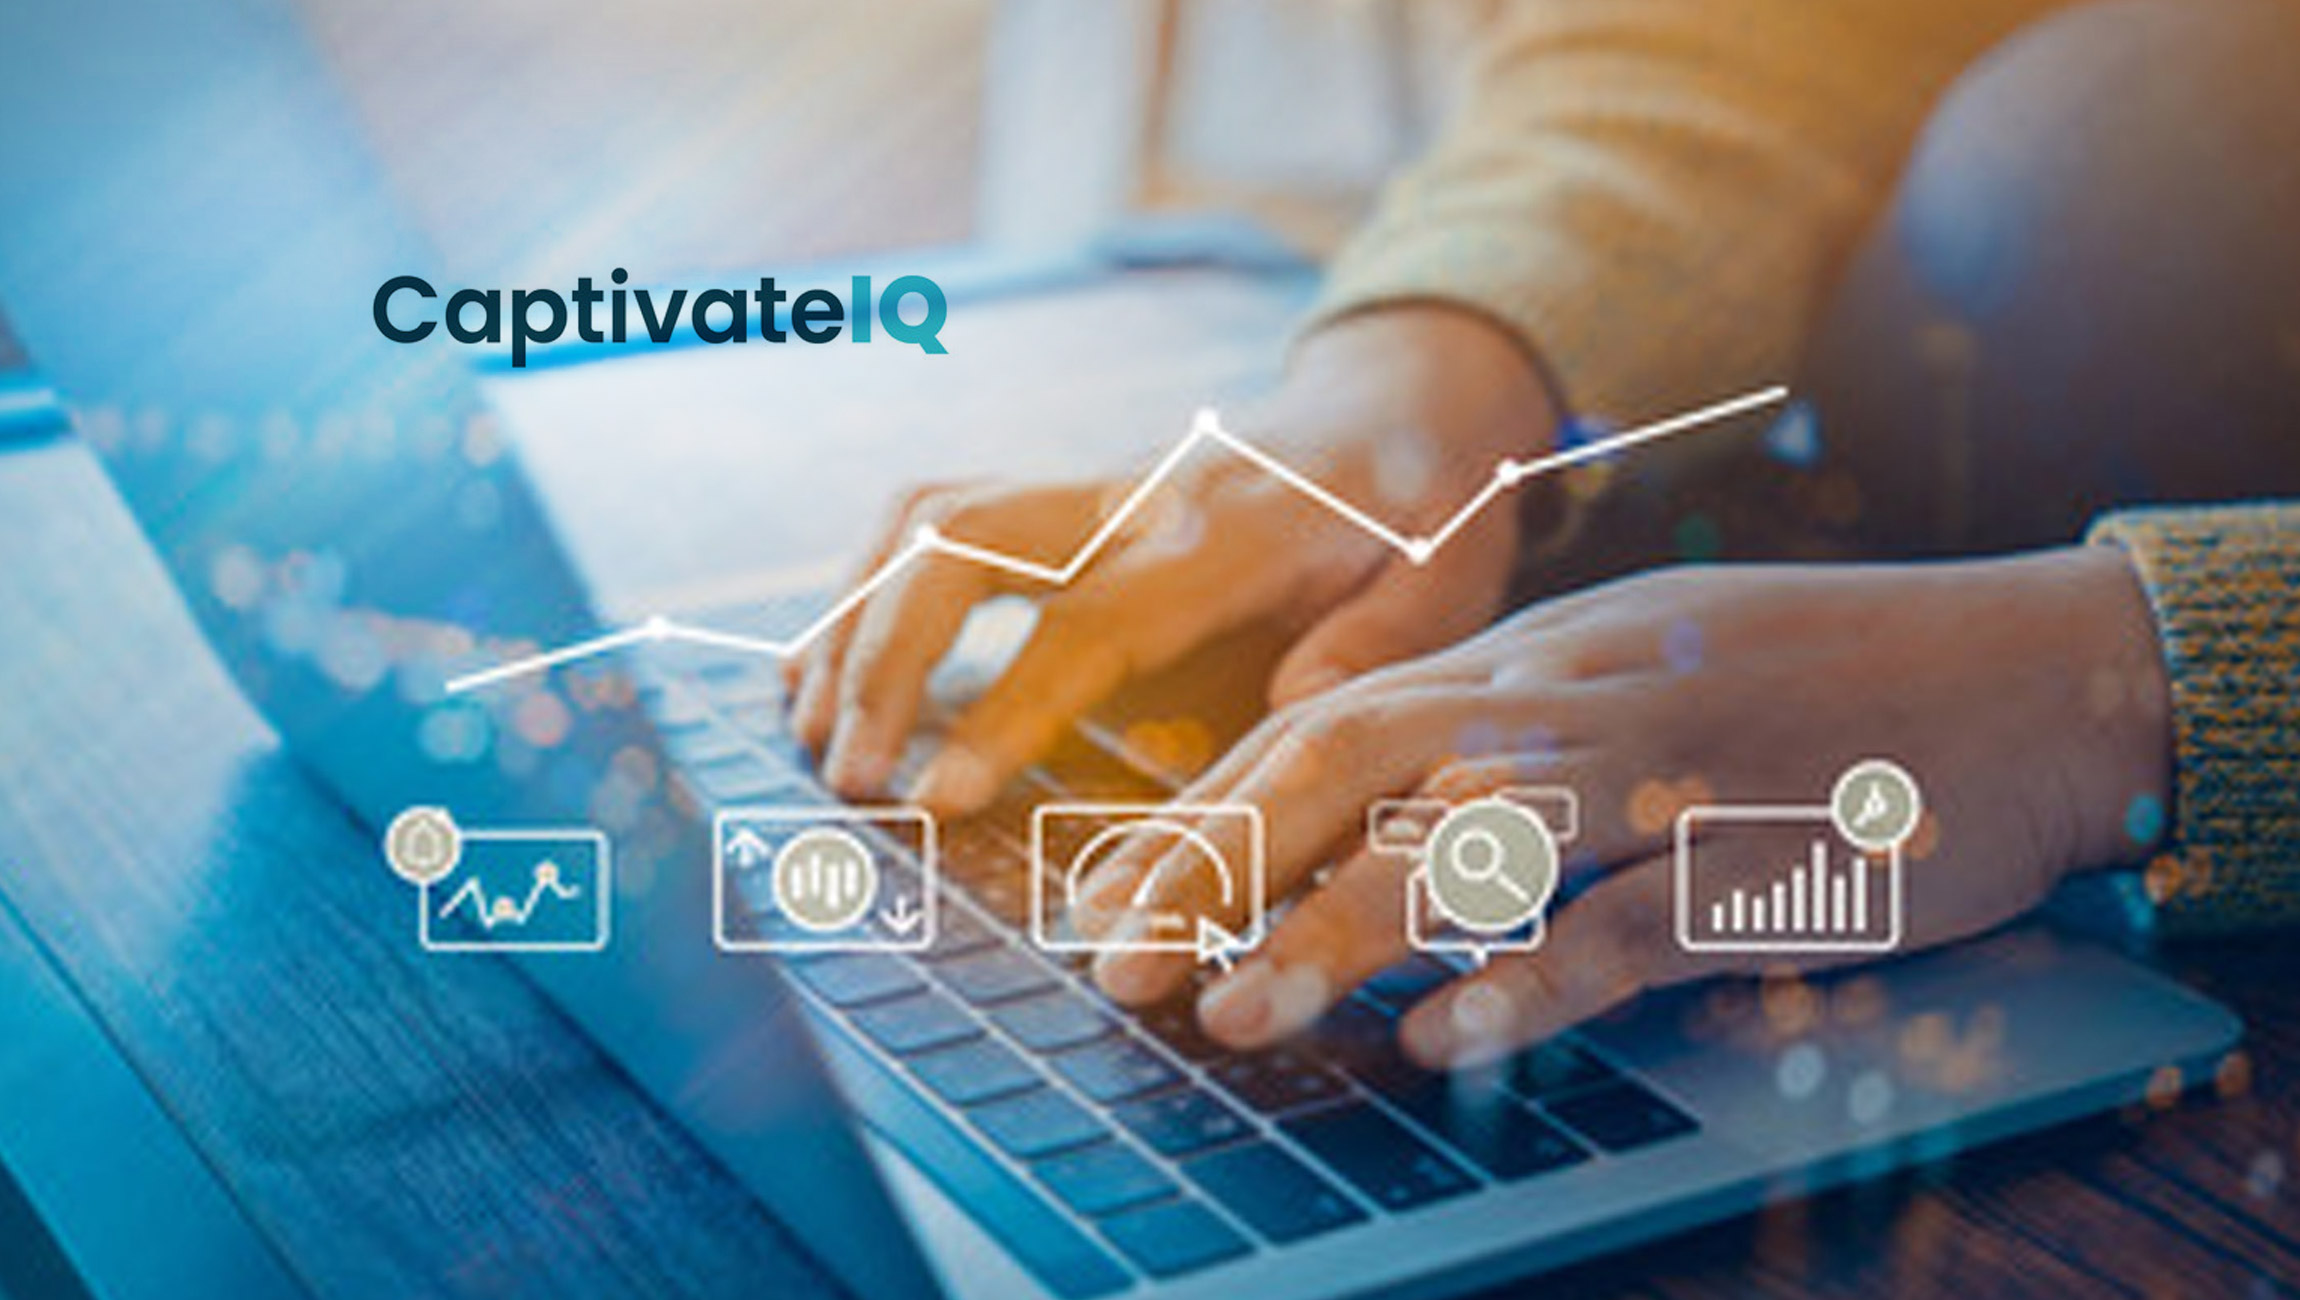 CaptivateIQ Finds 92% of Sales Reps View Visibility into Compensation Crucial to Motivation and Retention, But Only 26% of Companies Track Real-Time Performance